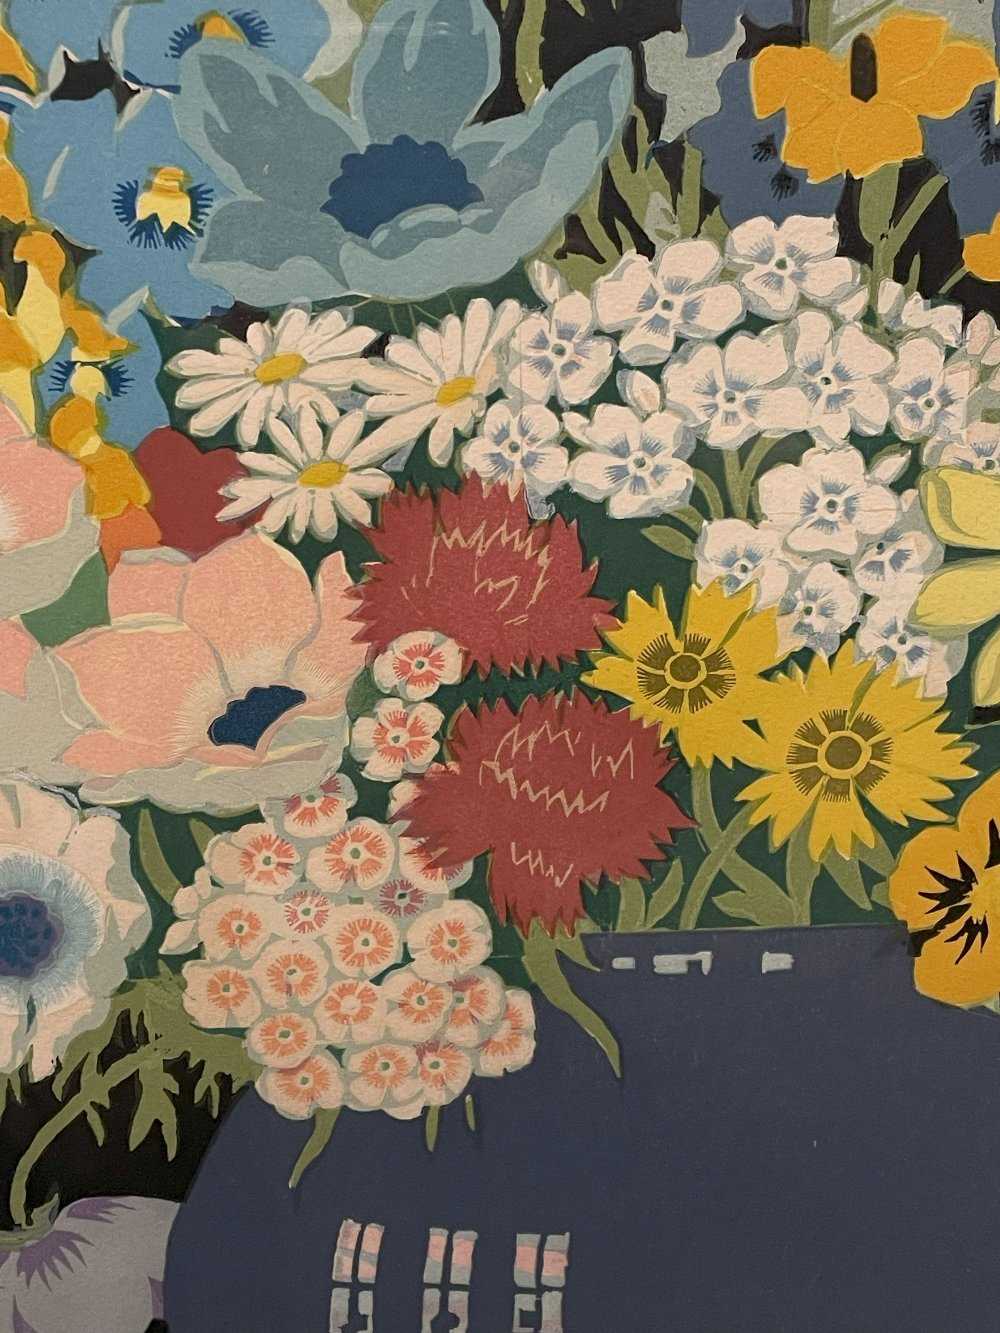 JOHN HALL THORPE (1874-1947) woodcut - The Country Bunch, wildflowers in a blue vase with window - Image 6 of 17